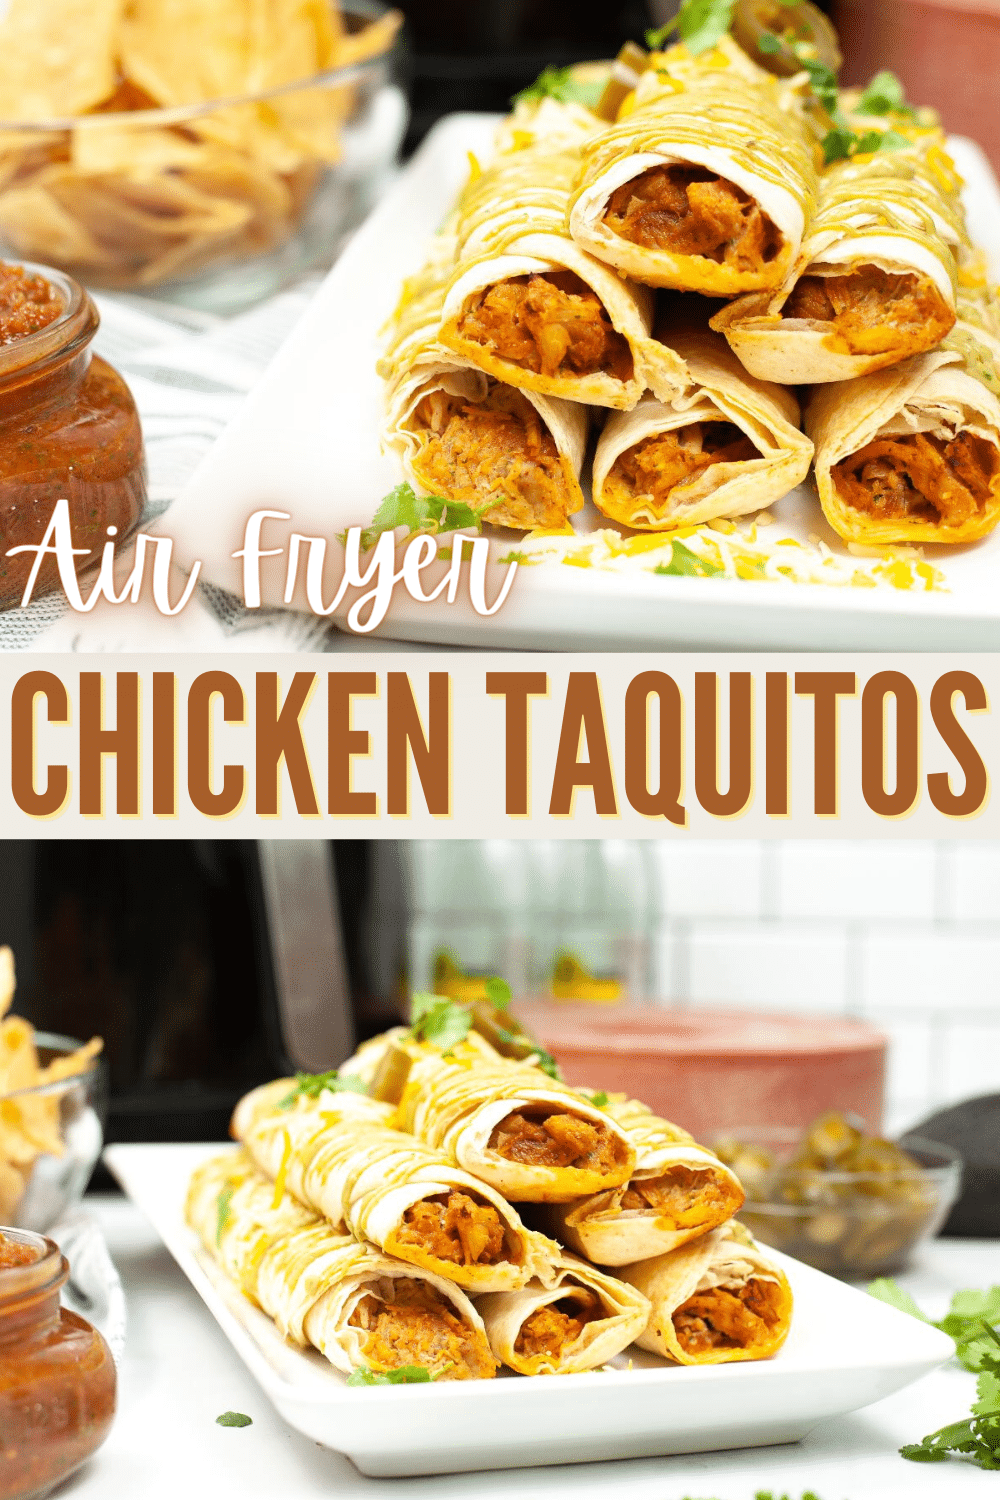 Air Fryer Chicken Taquitos are crispy on the outside and filled with flavorful chicken and then air fried to perfection. Kids love them! #airfryer #chickentaquitos #recipe #taquitos #chicken via @wondermomwannab